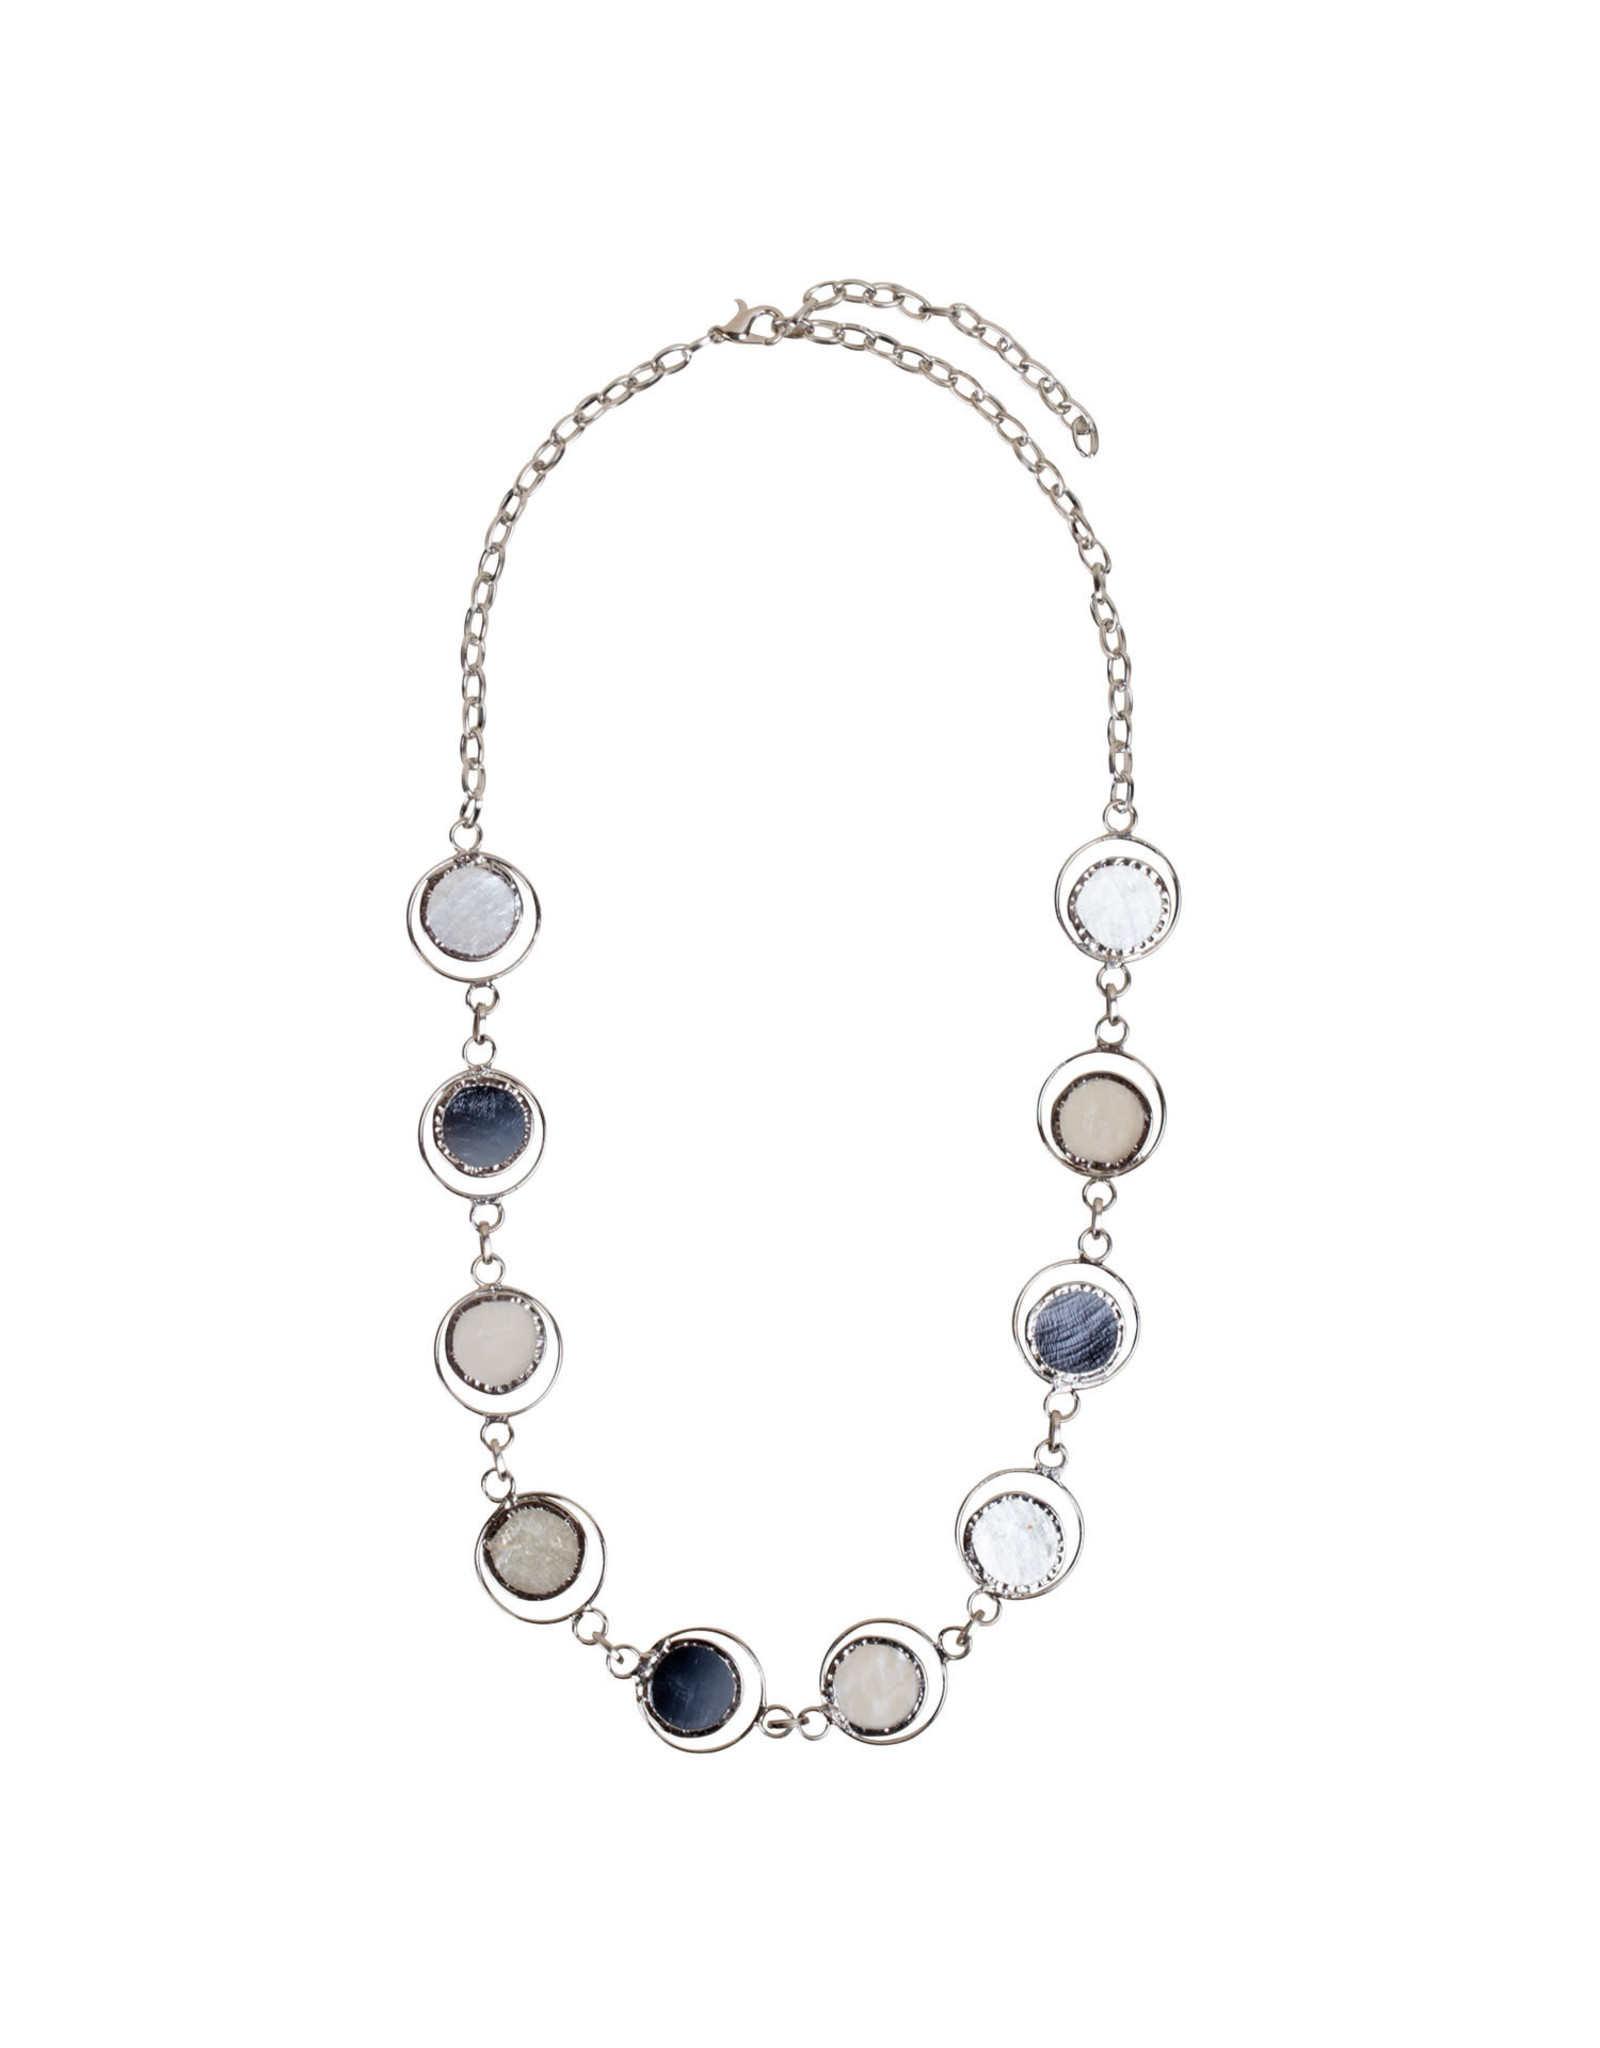 Philippines Moon Phase Necklace, Philippines